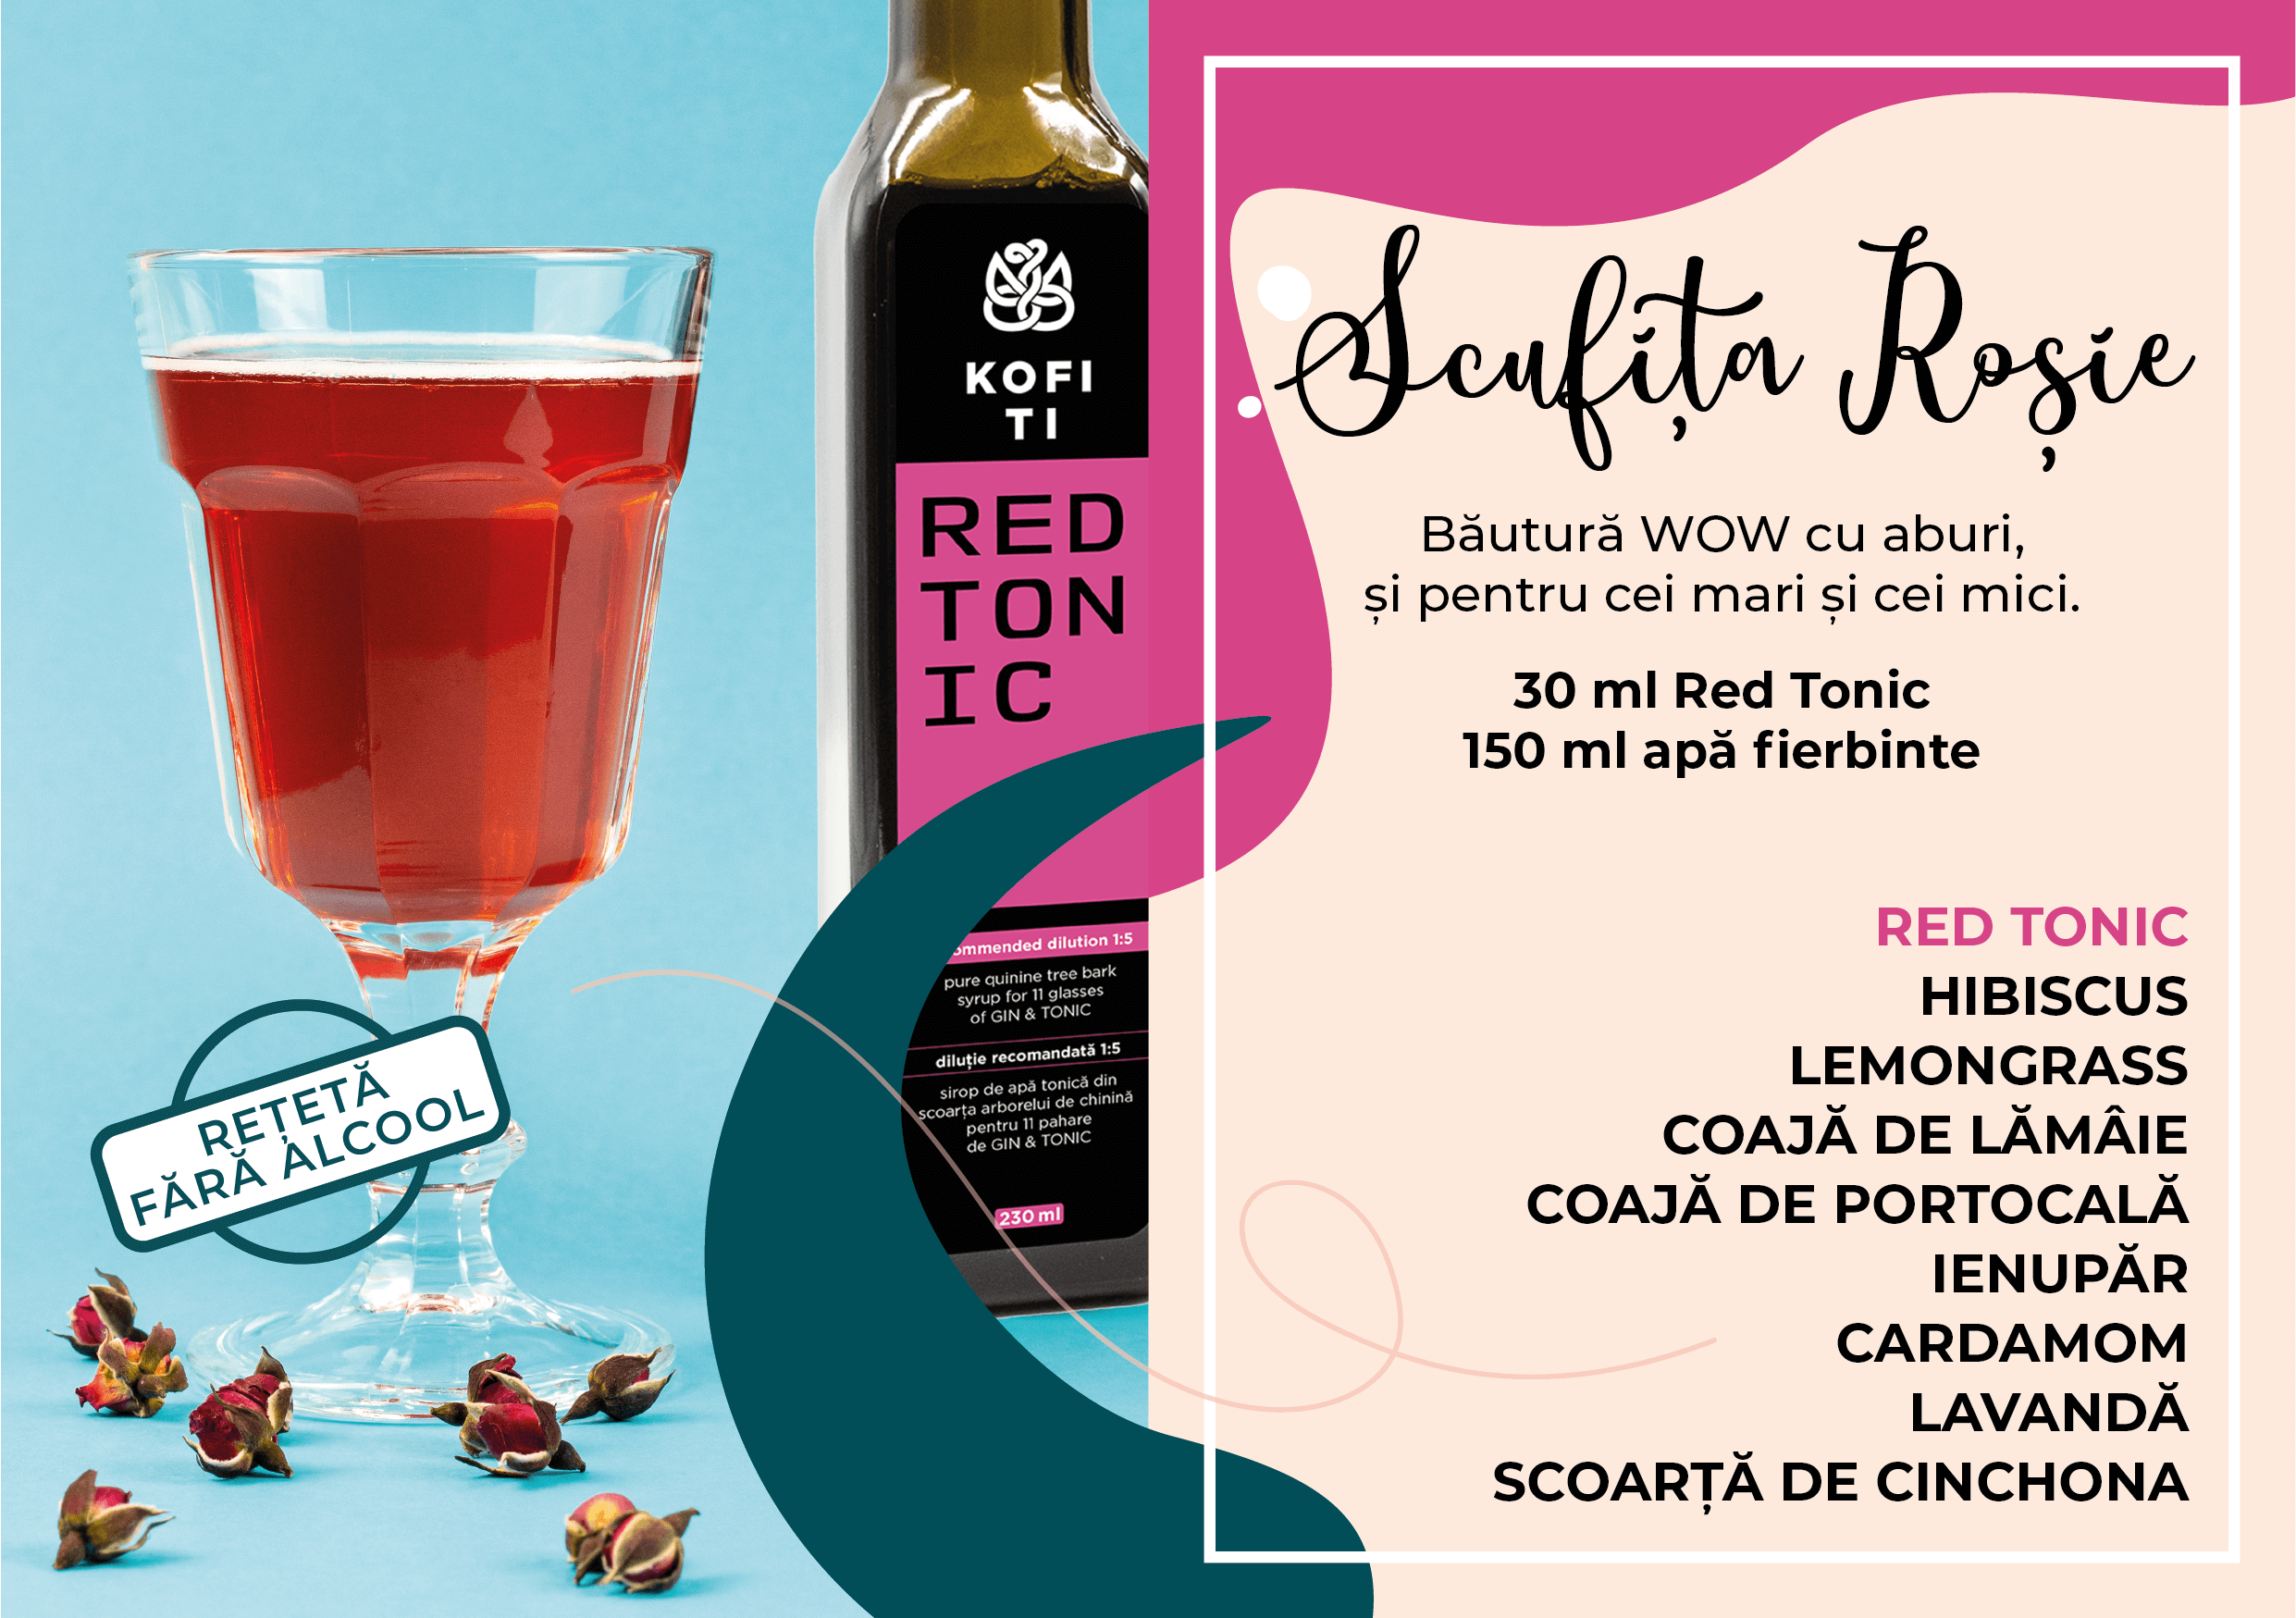 Little Red Riding Hood / non-alcoholic recipe